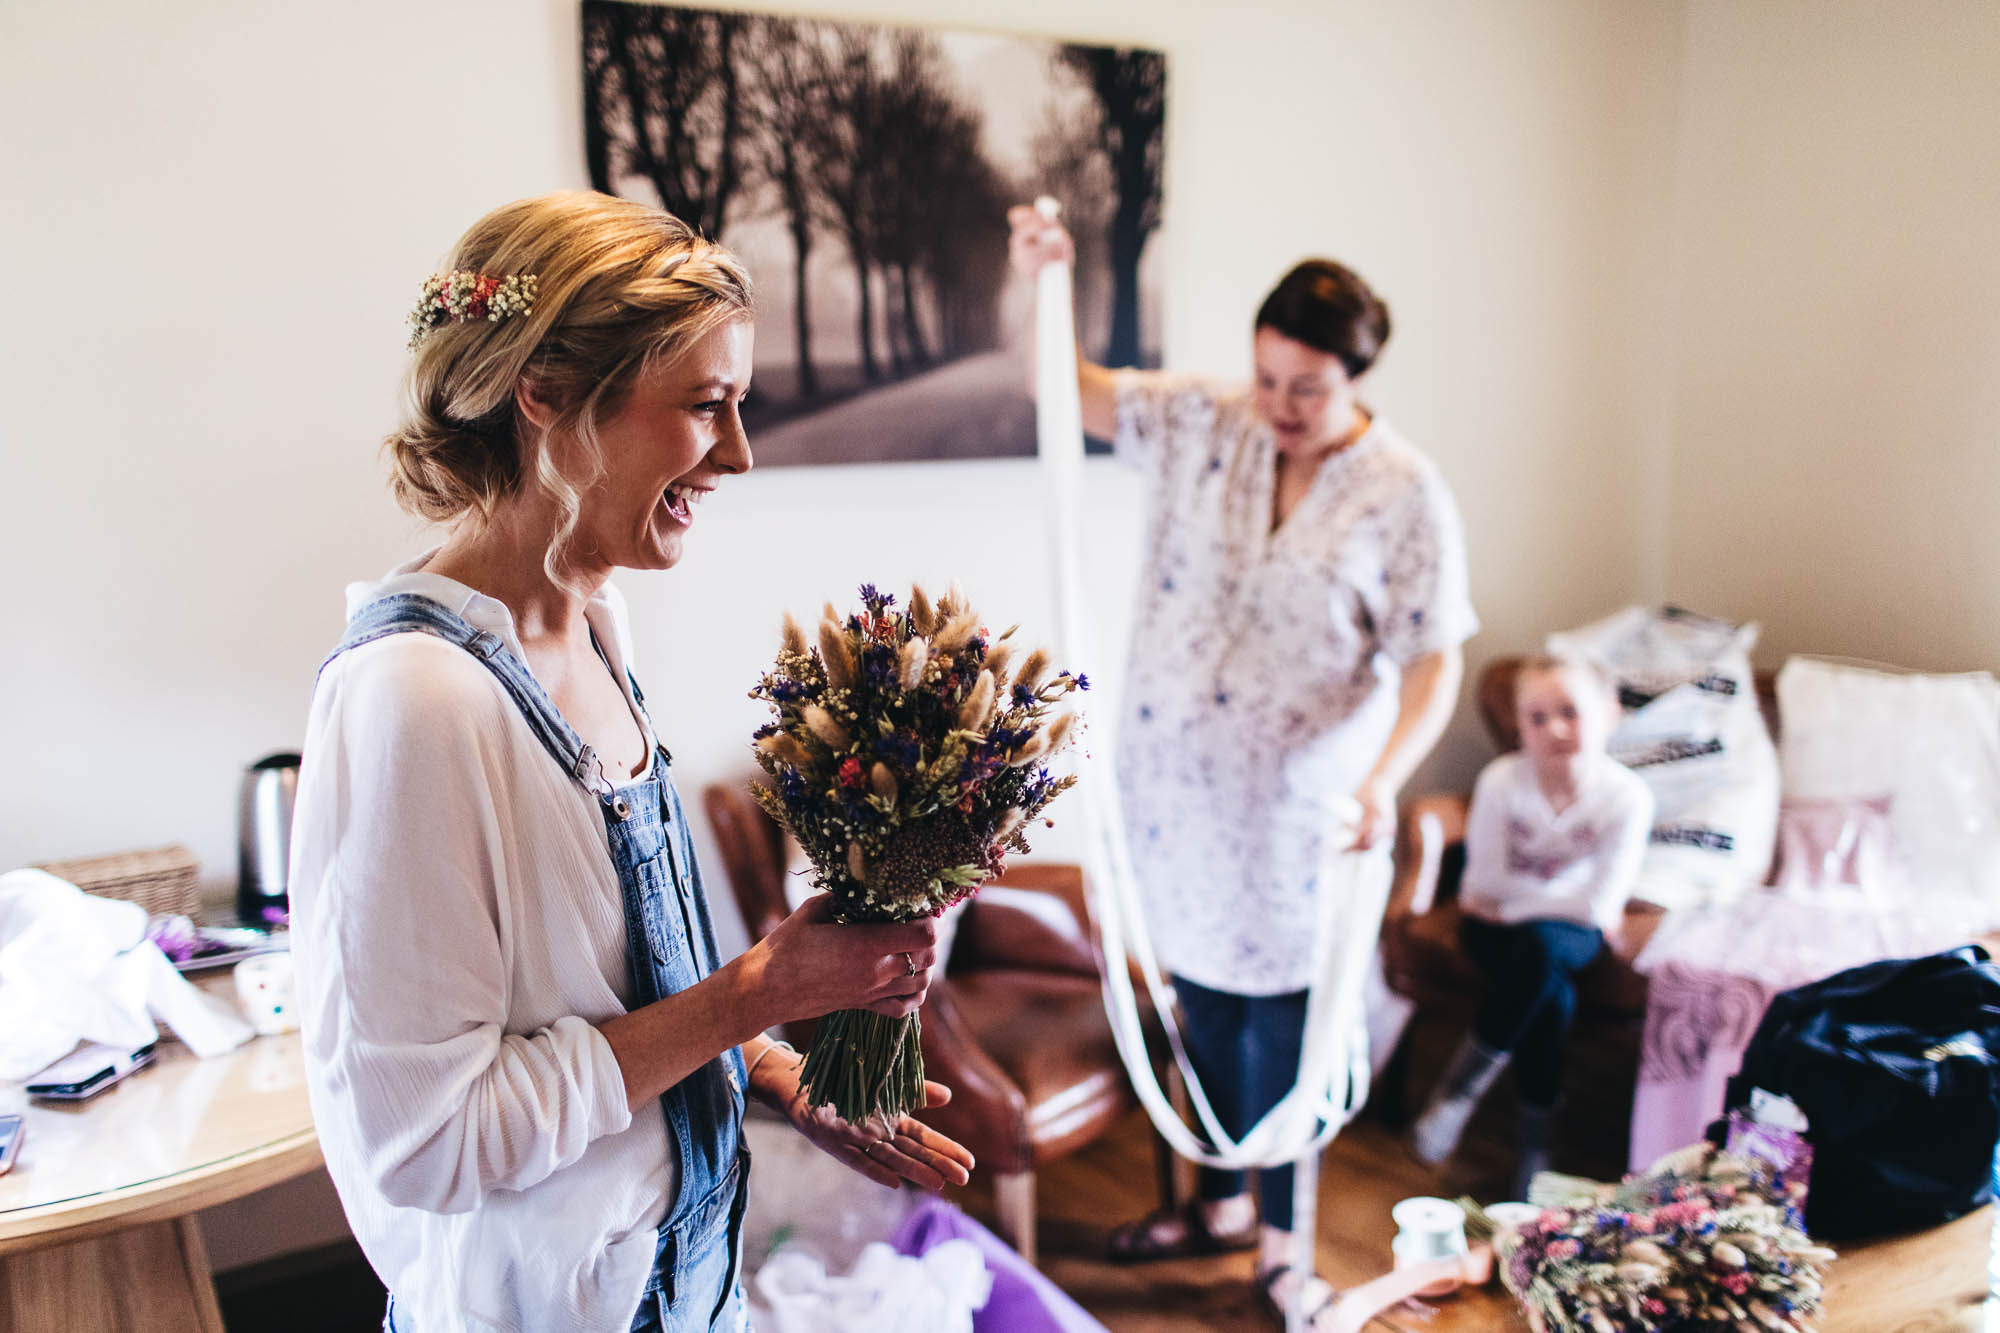 Bride holds wedding bouquet at wedding preparations while family helps in background